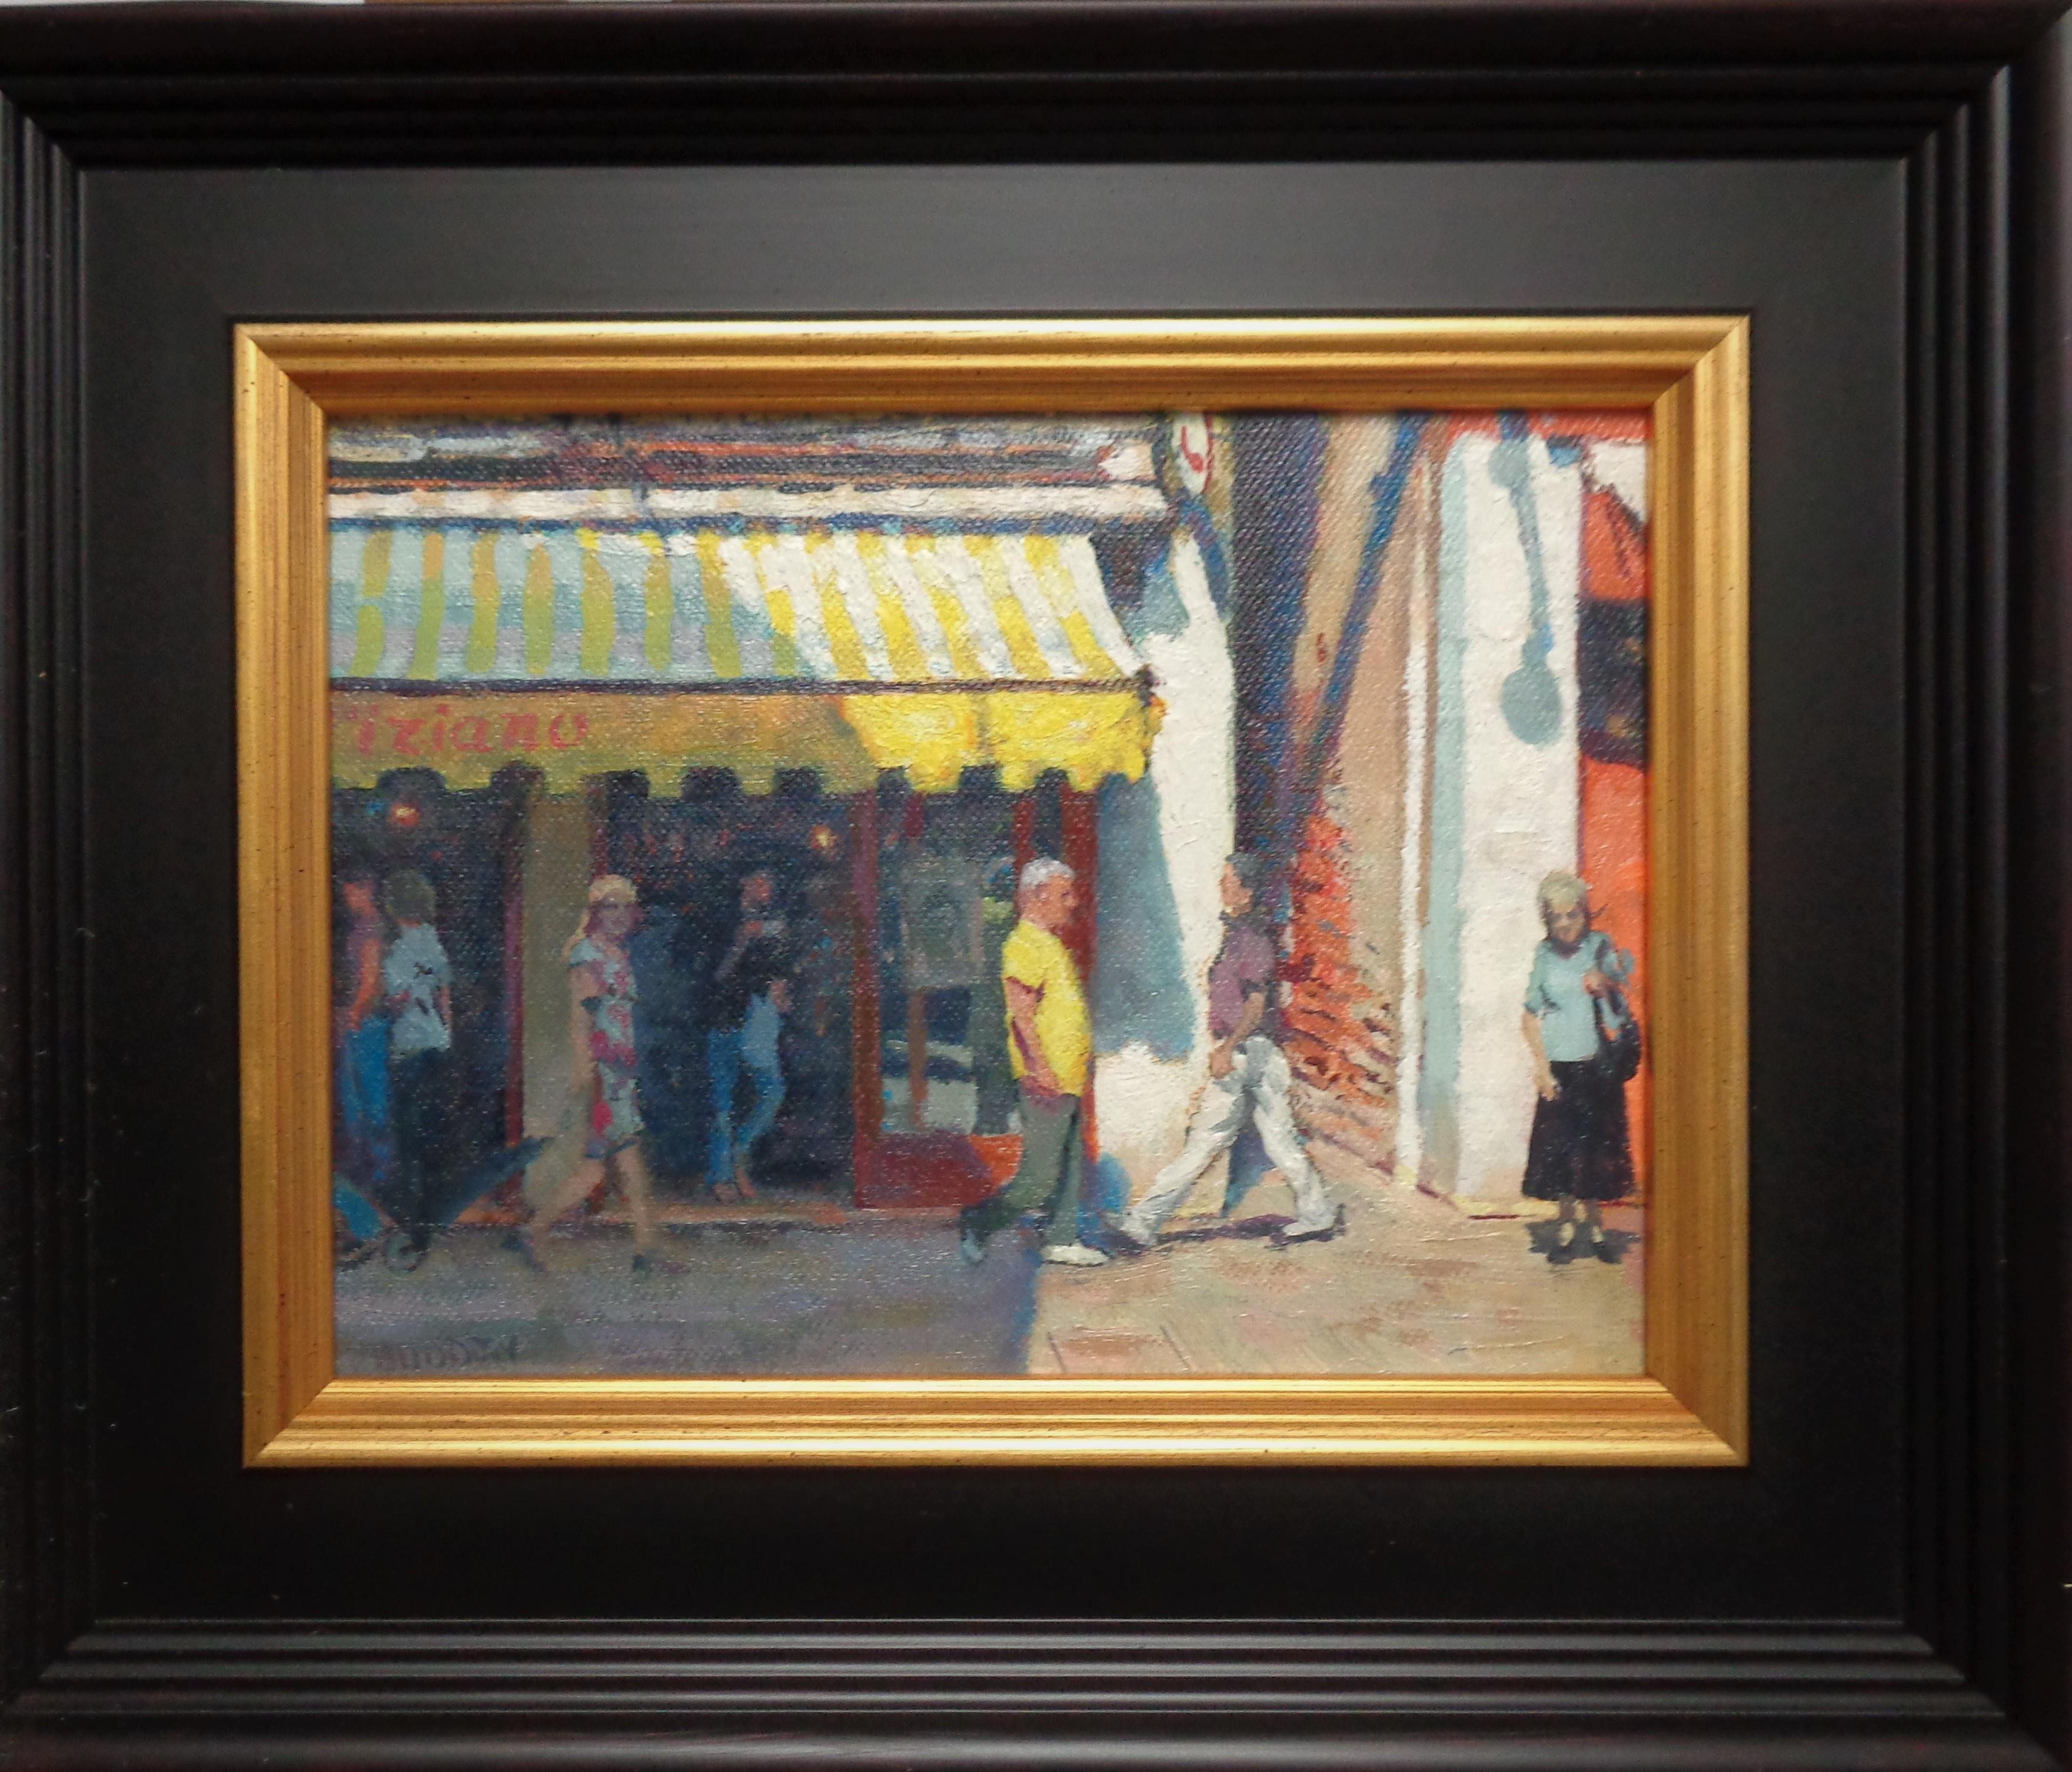 Venetian Yellow, Venice
oil/panel
6 x 8 unframed 9.75 x 11.75 framed, is an oil painting on panel by award winning contemporary artist Michael Budden that showcases a wonderful scene rich in history. The viewer can enjoy the variety of shapes,